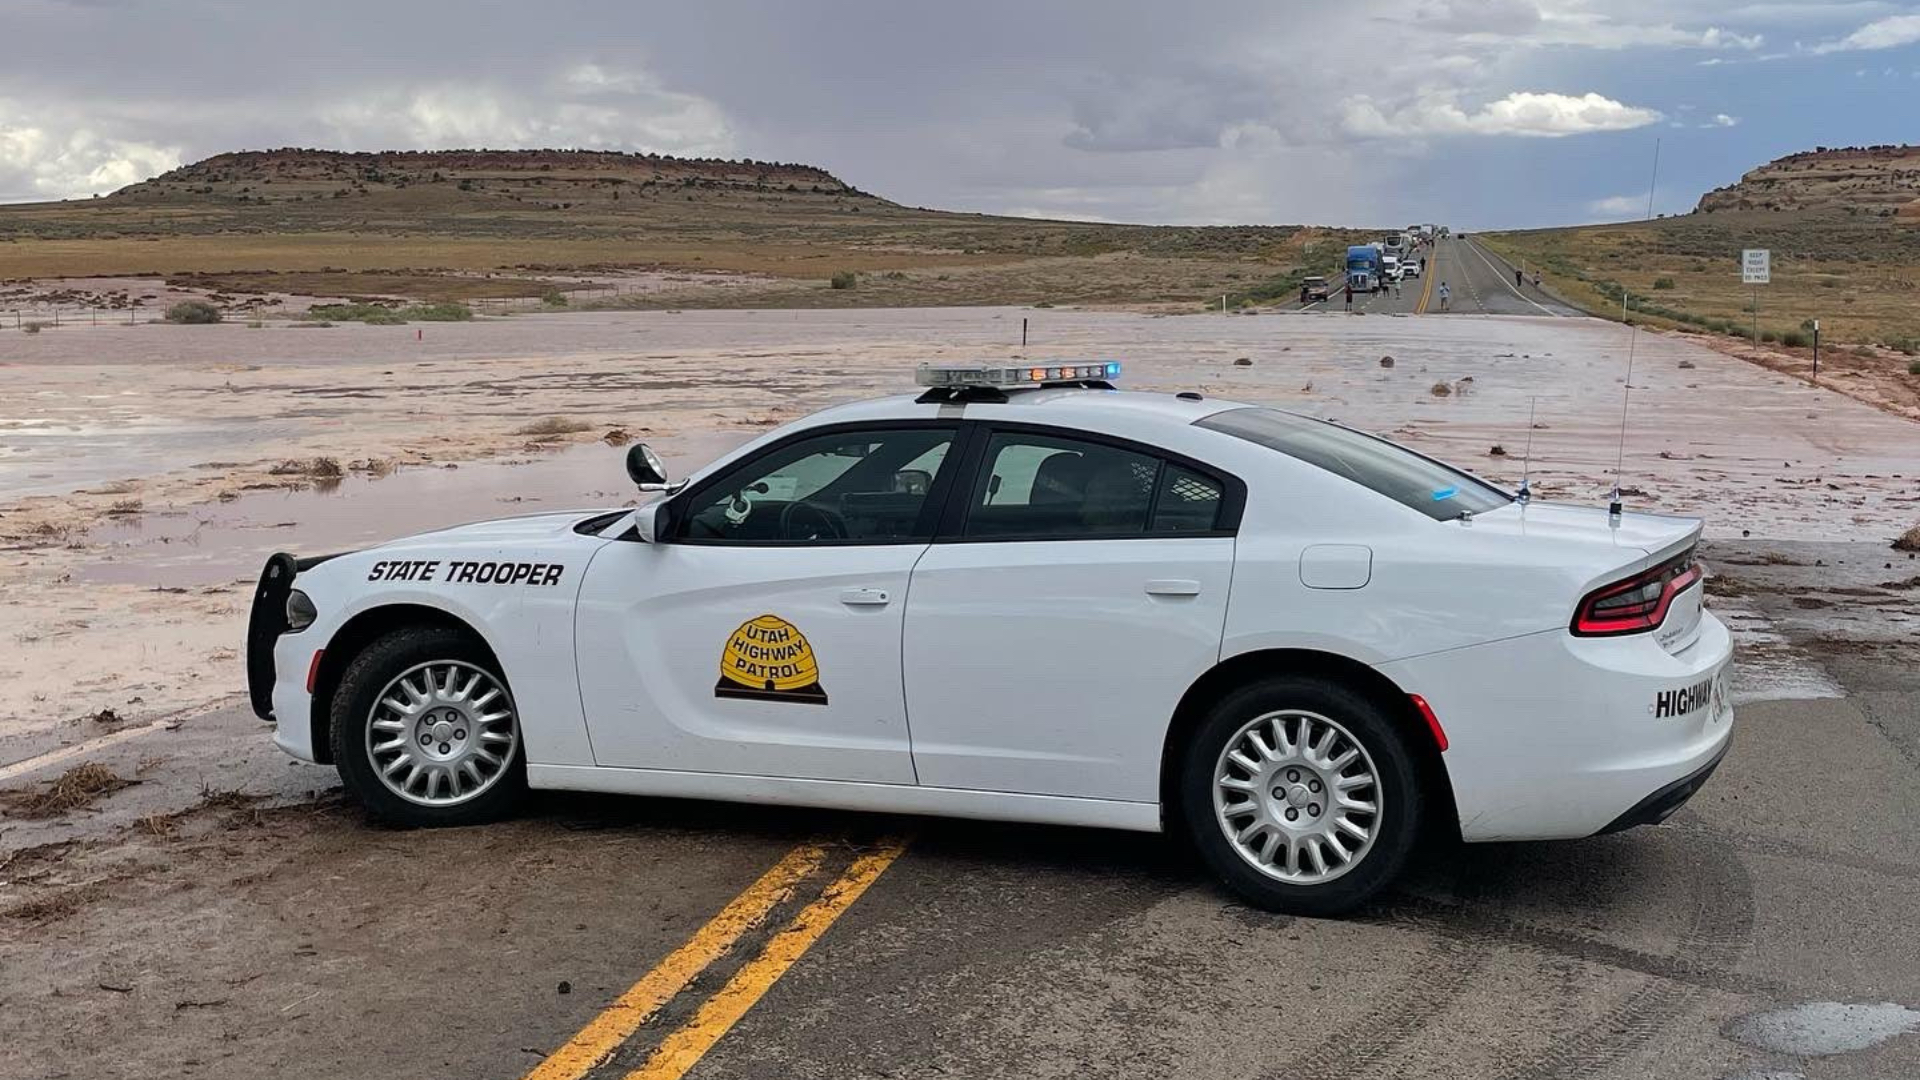  Flooding damages highway, delays travel in southern Utah 